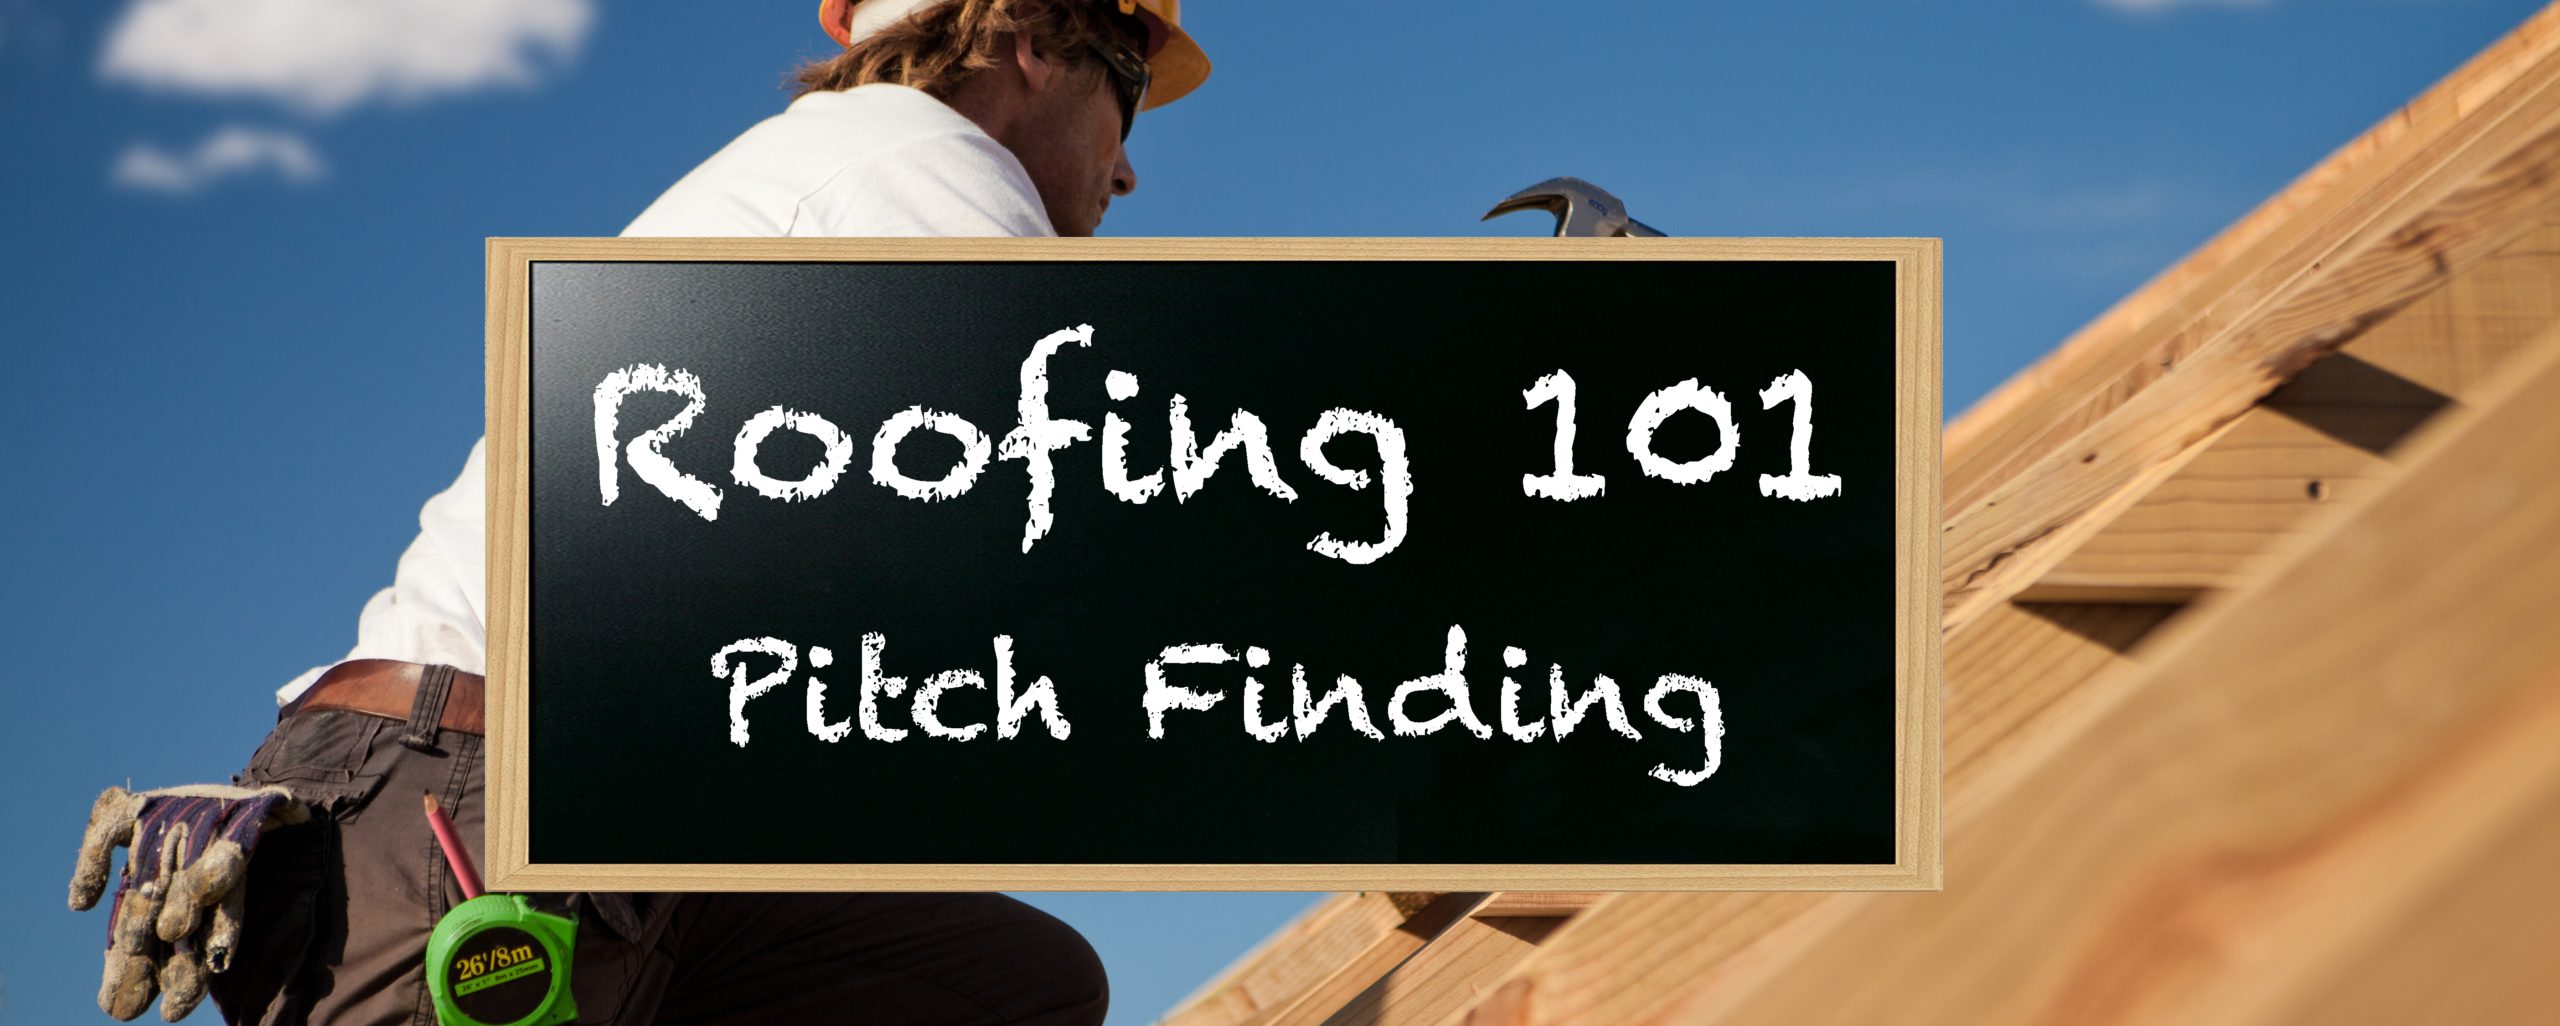 Roofing101_Pitch